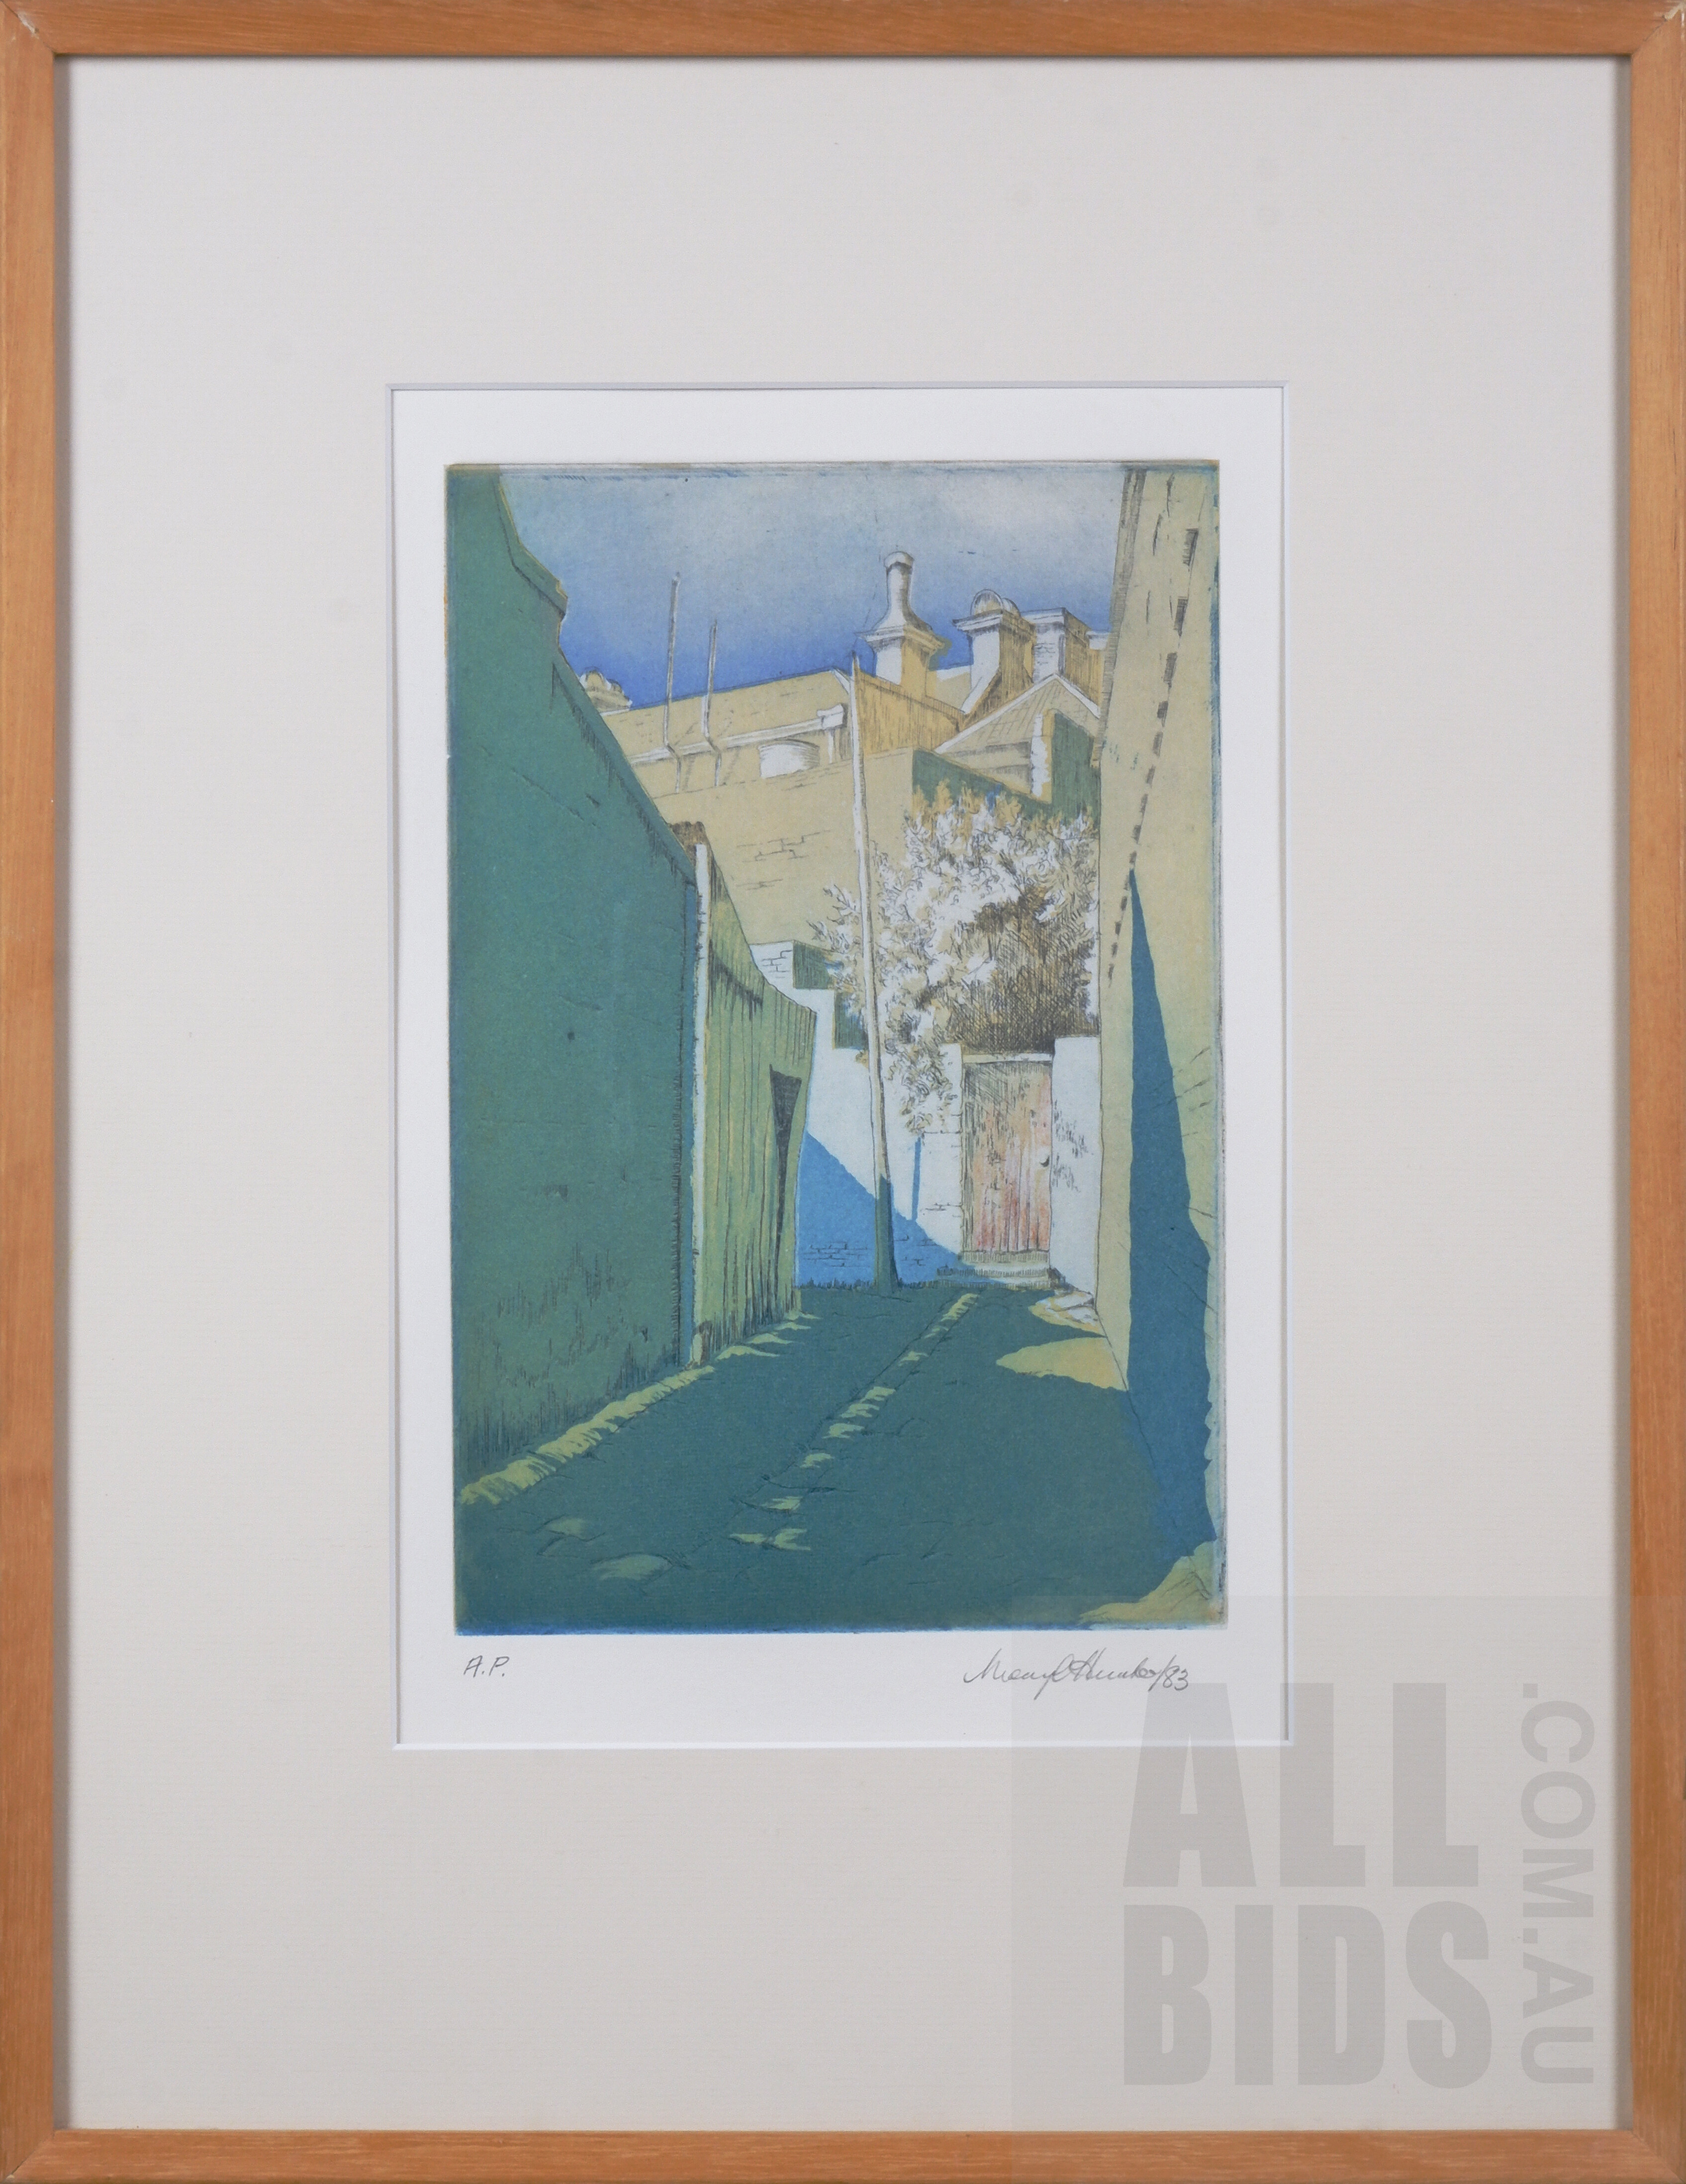 'Mary Hunter, Untitled (Laneway with Shadows) 1983, Etching & Aquatint, 25 x 17 cm (image size)'